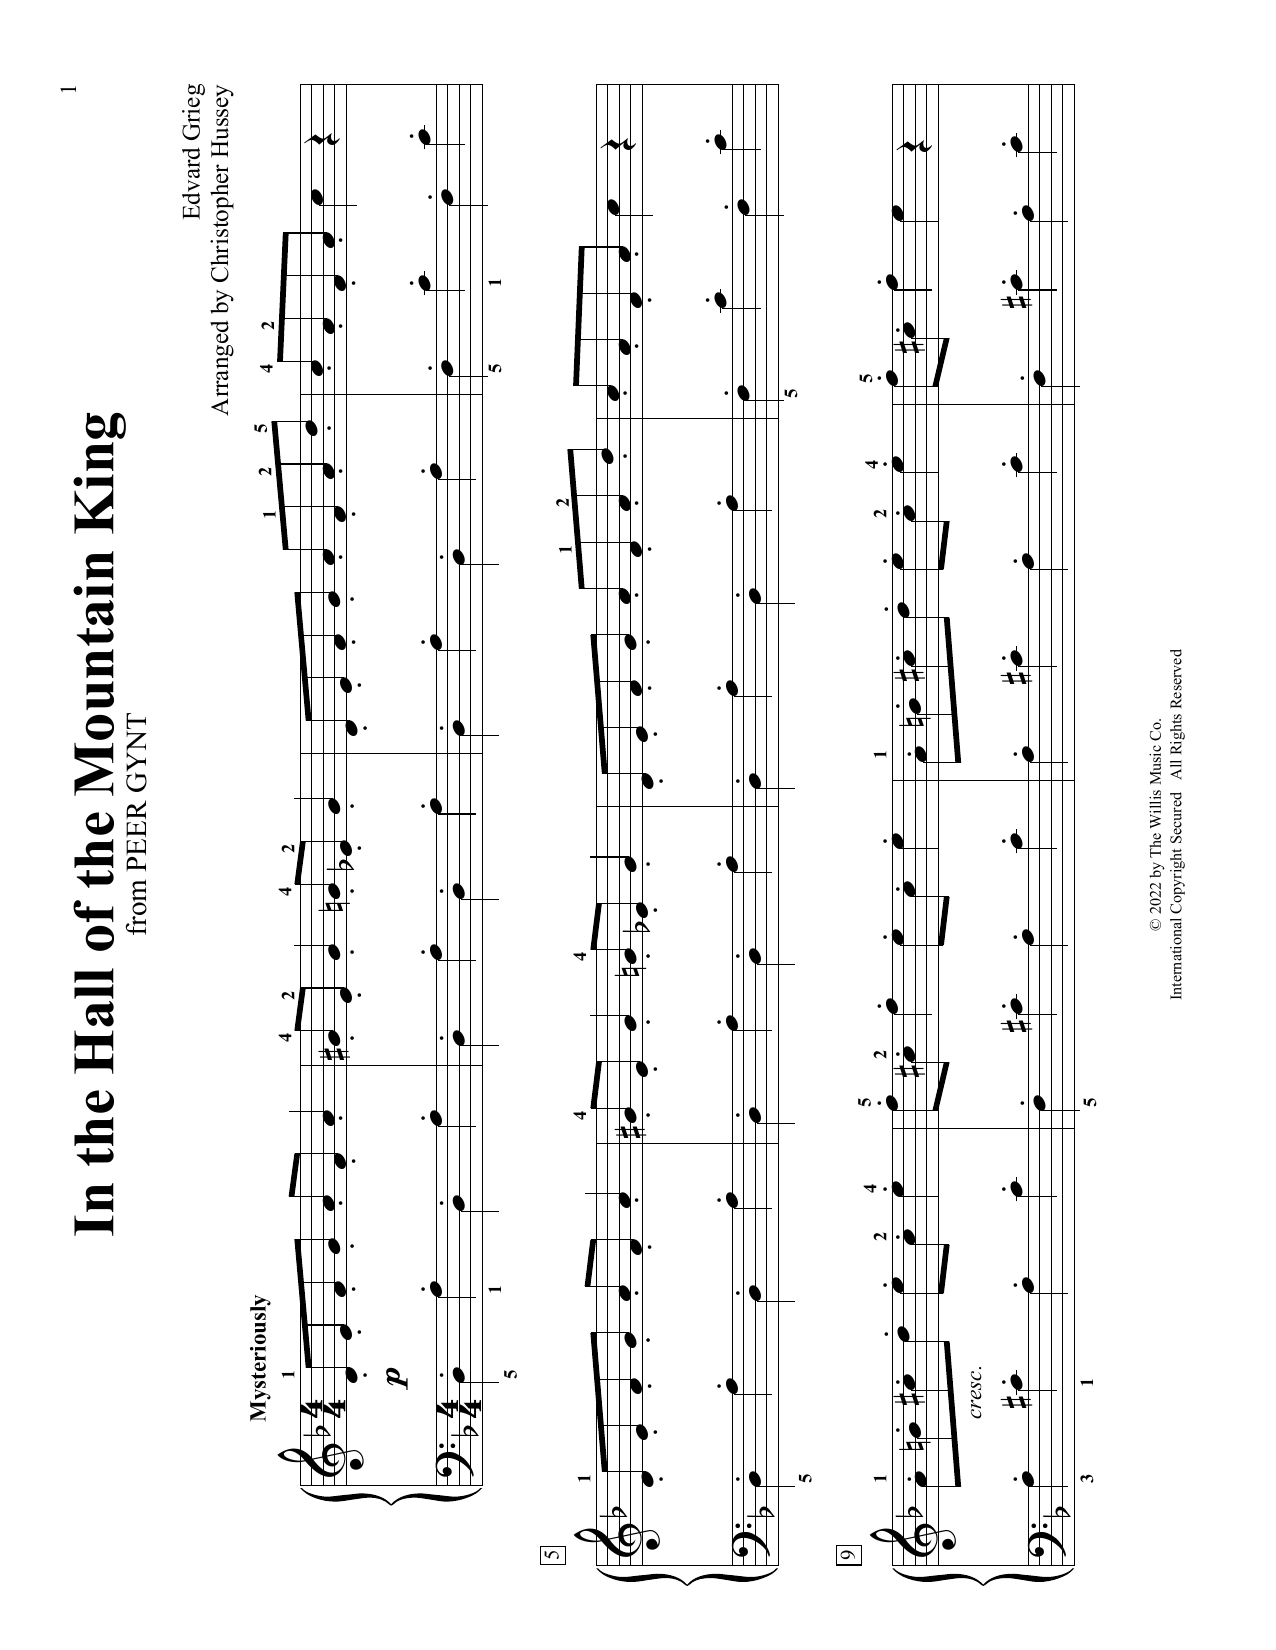 Download Edvard Grieg In The Hall Of The Mountain King (arr. Sheet Music